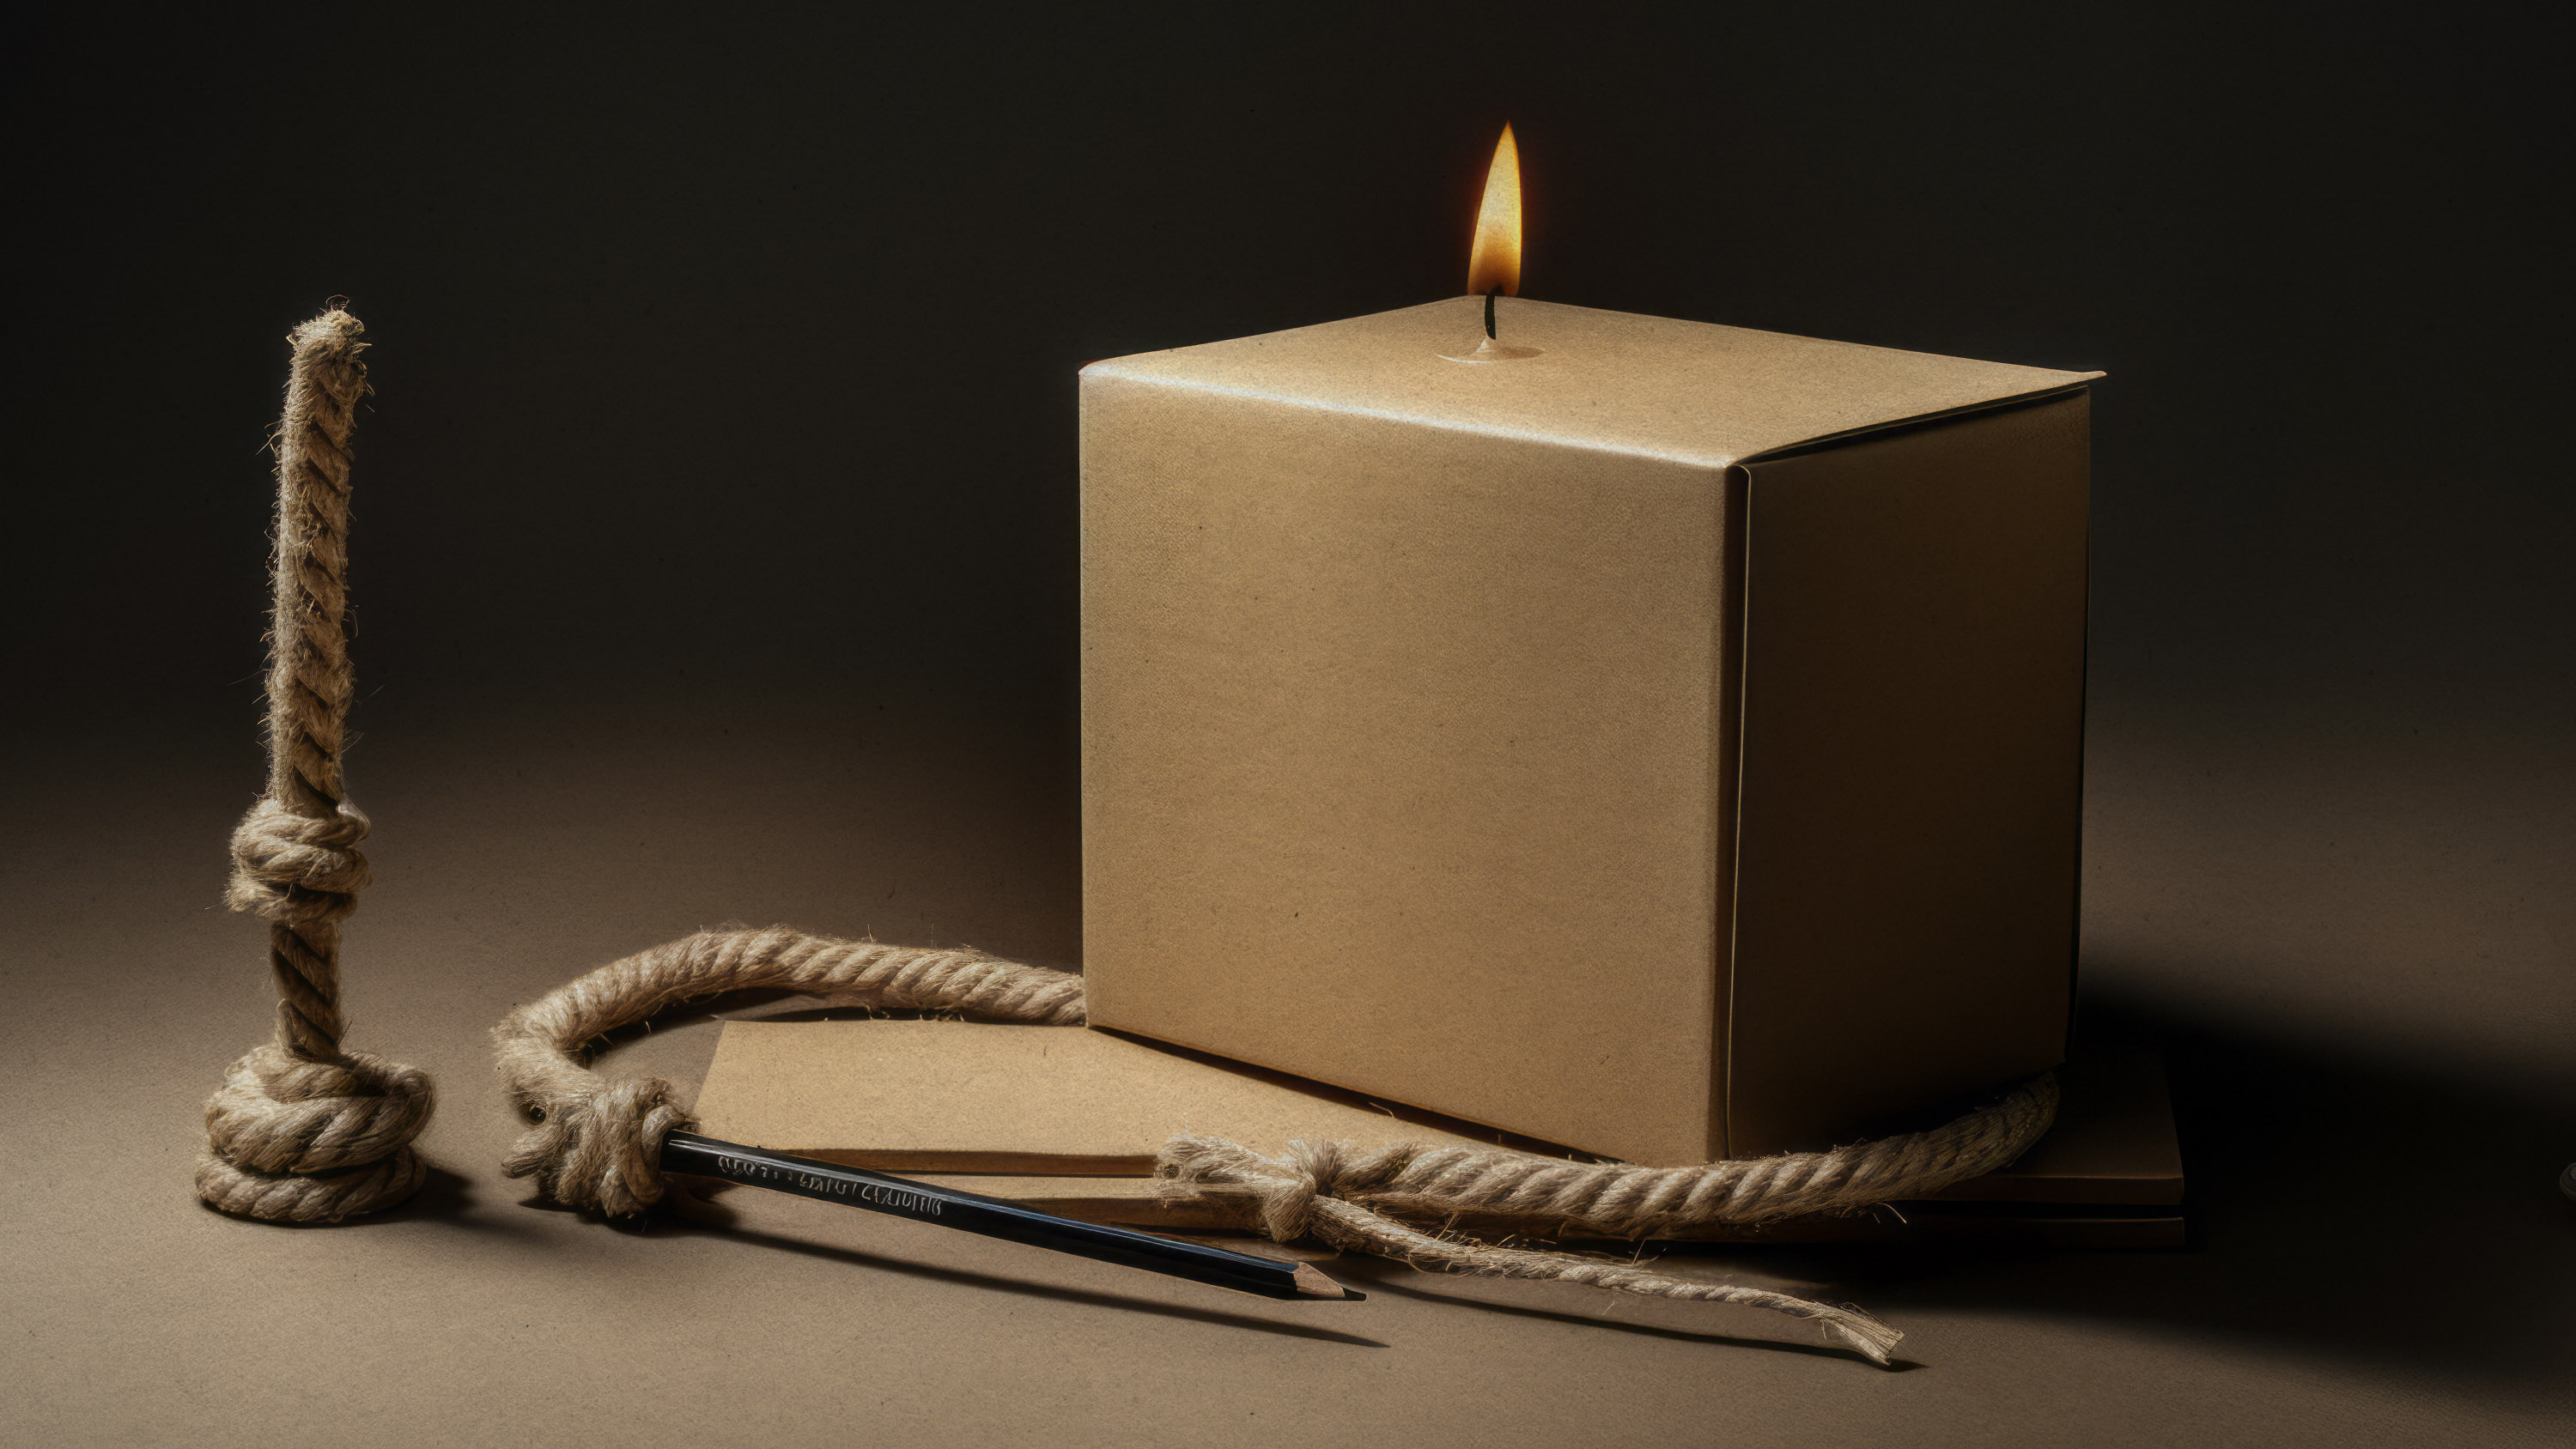 a rope, a pencil, and a candle flame emitting from a cardboard box